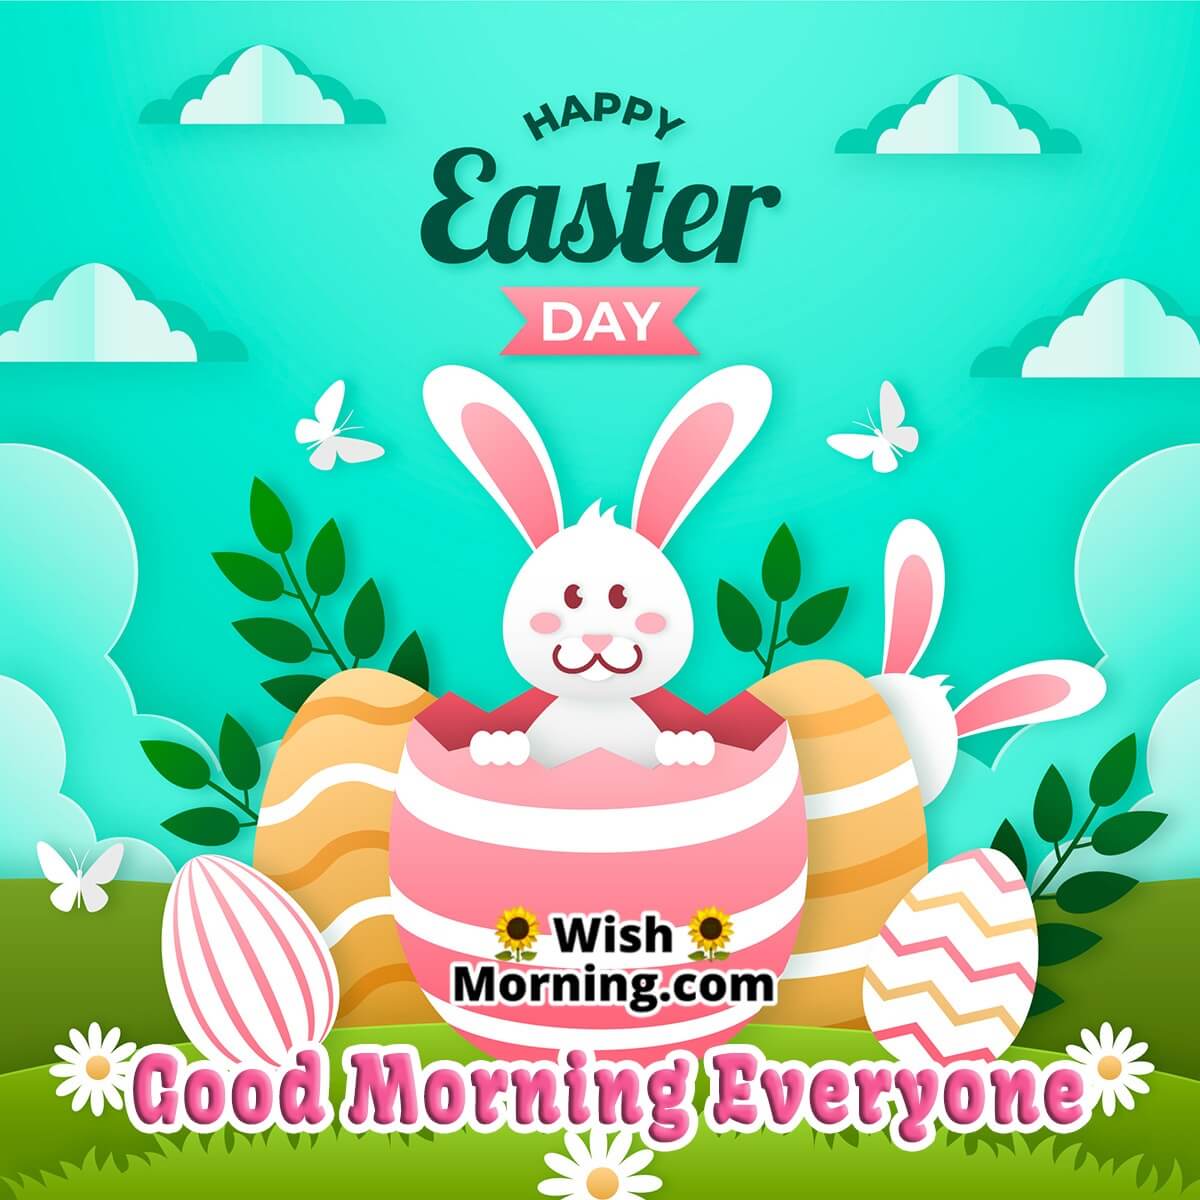 Happy Easter Good Morning Everyone